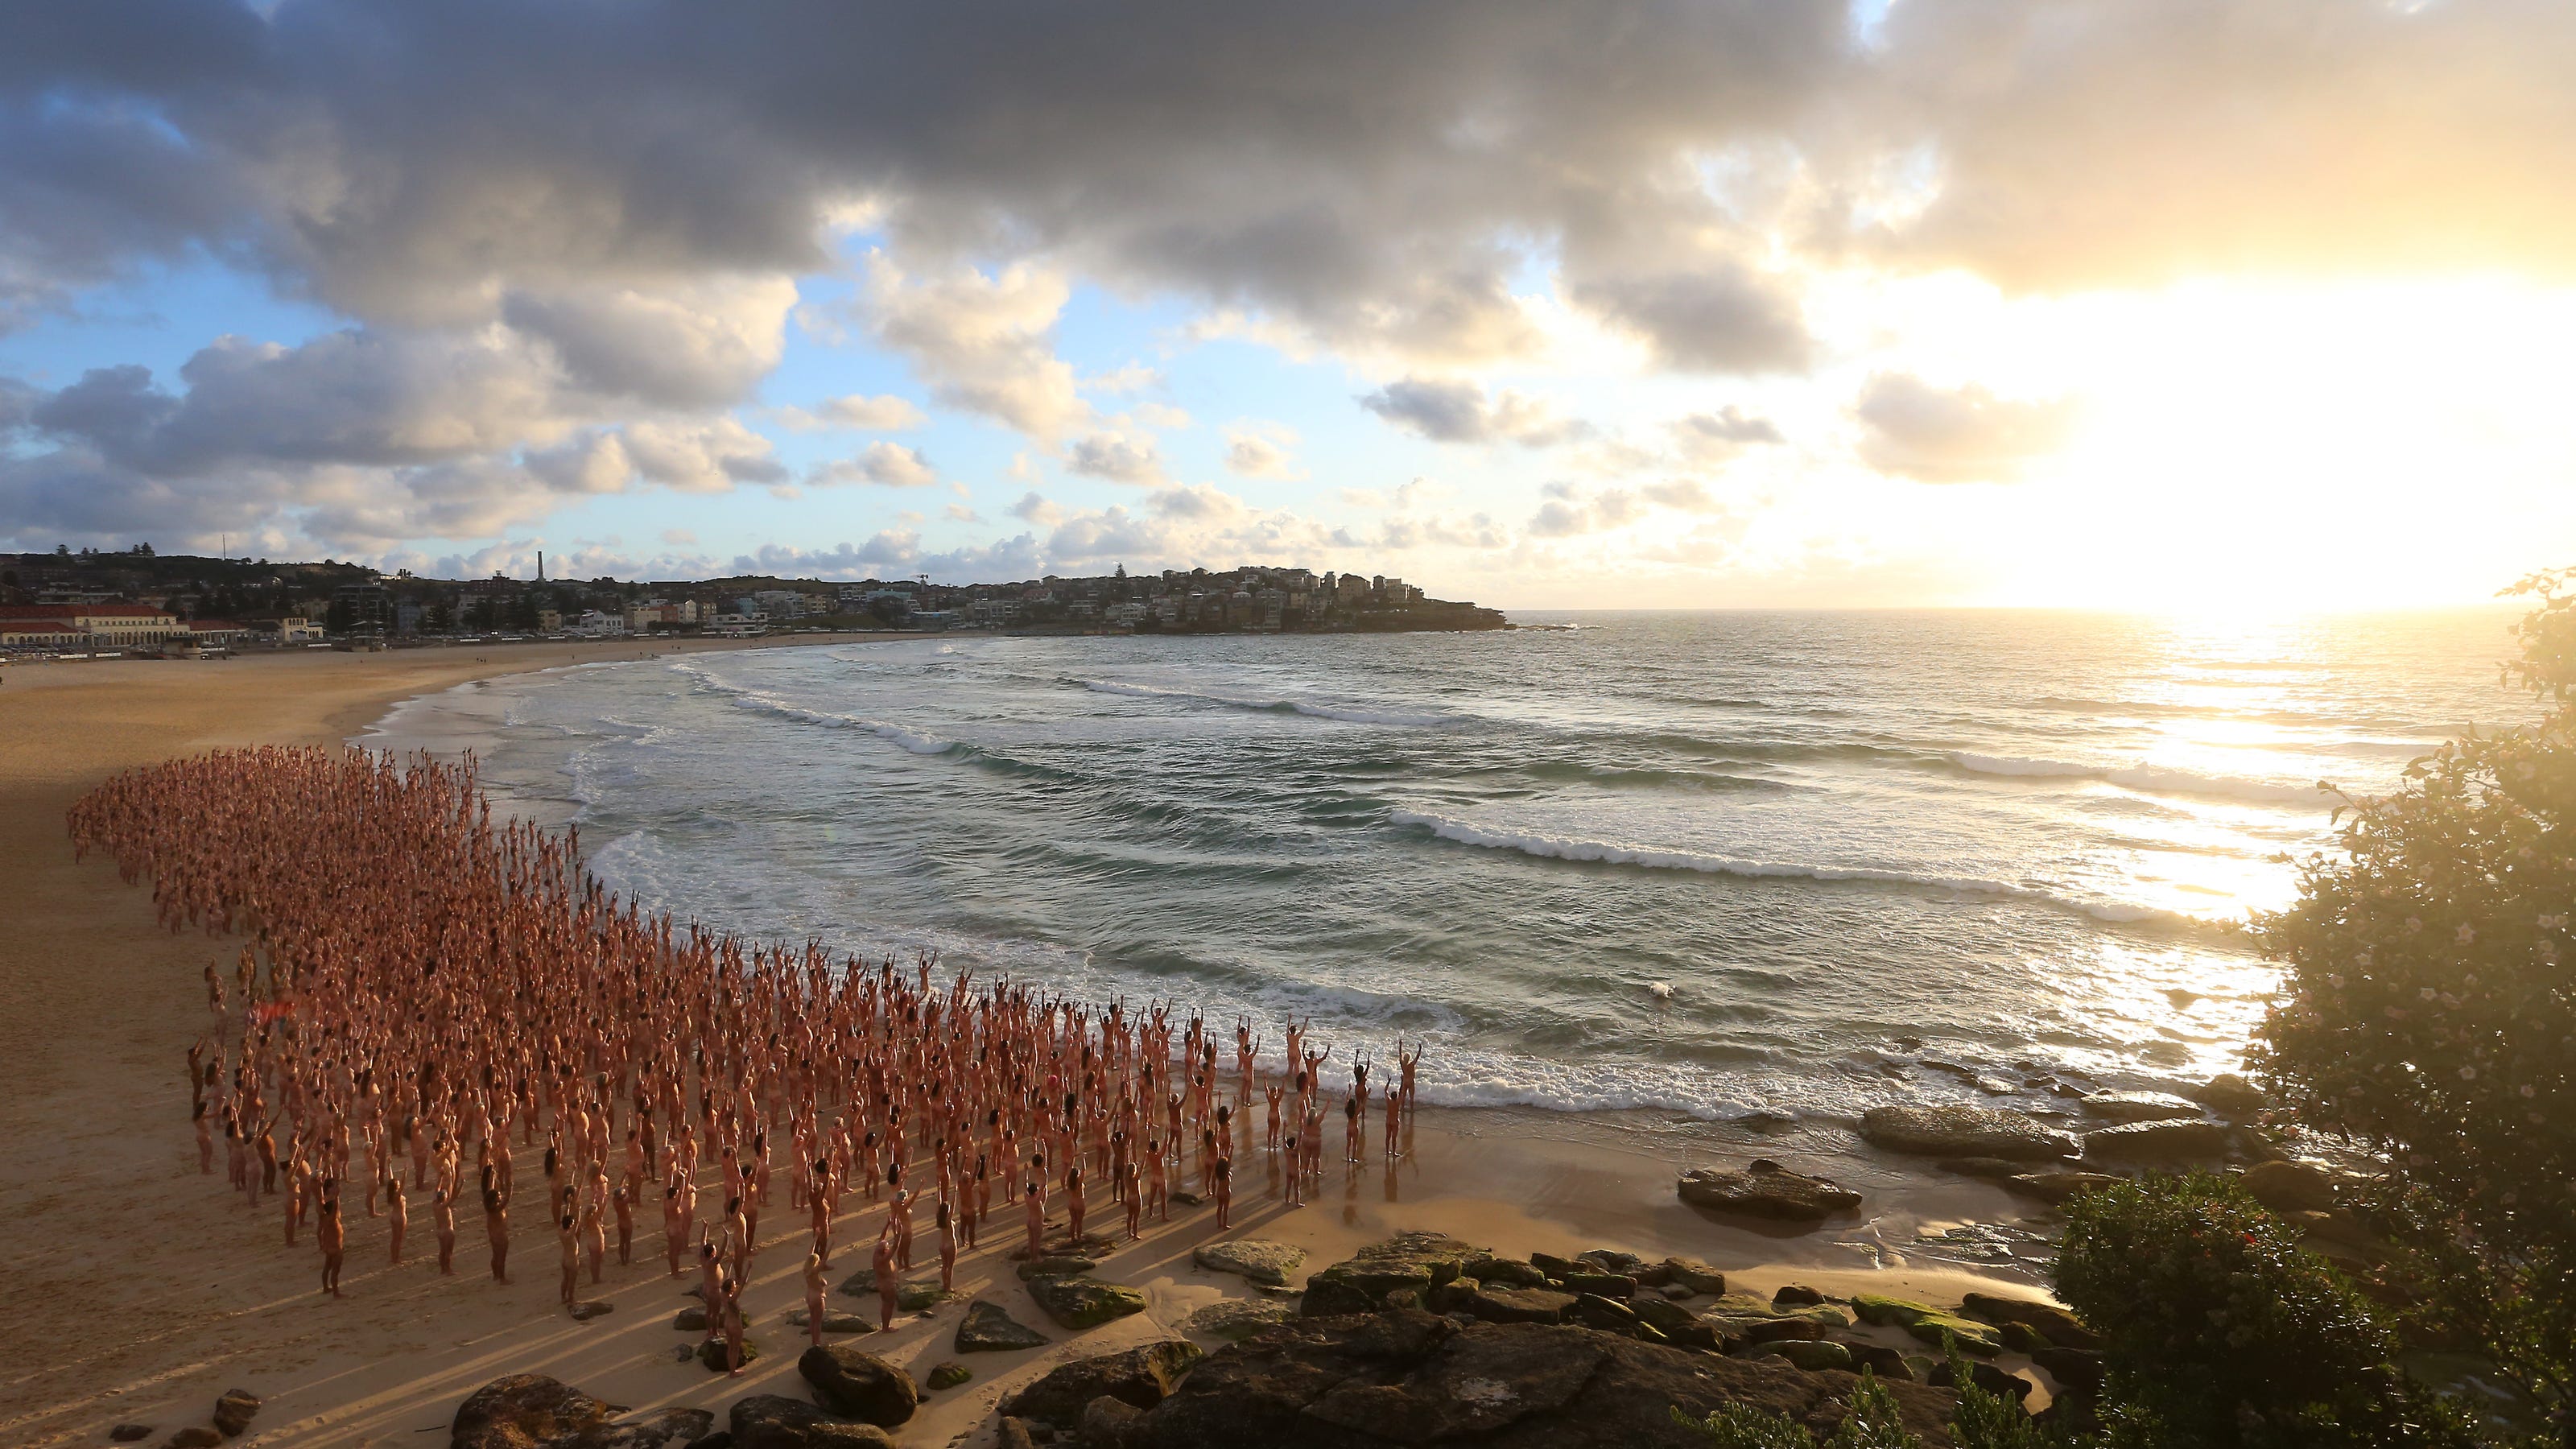 Naked Beach Gallery - Thousands pose nude at Australian beach in Spencer Tunick photo shoot